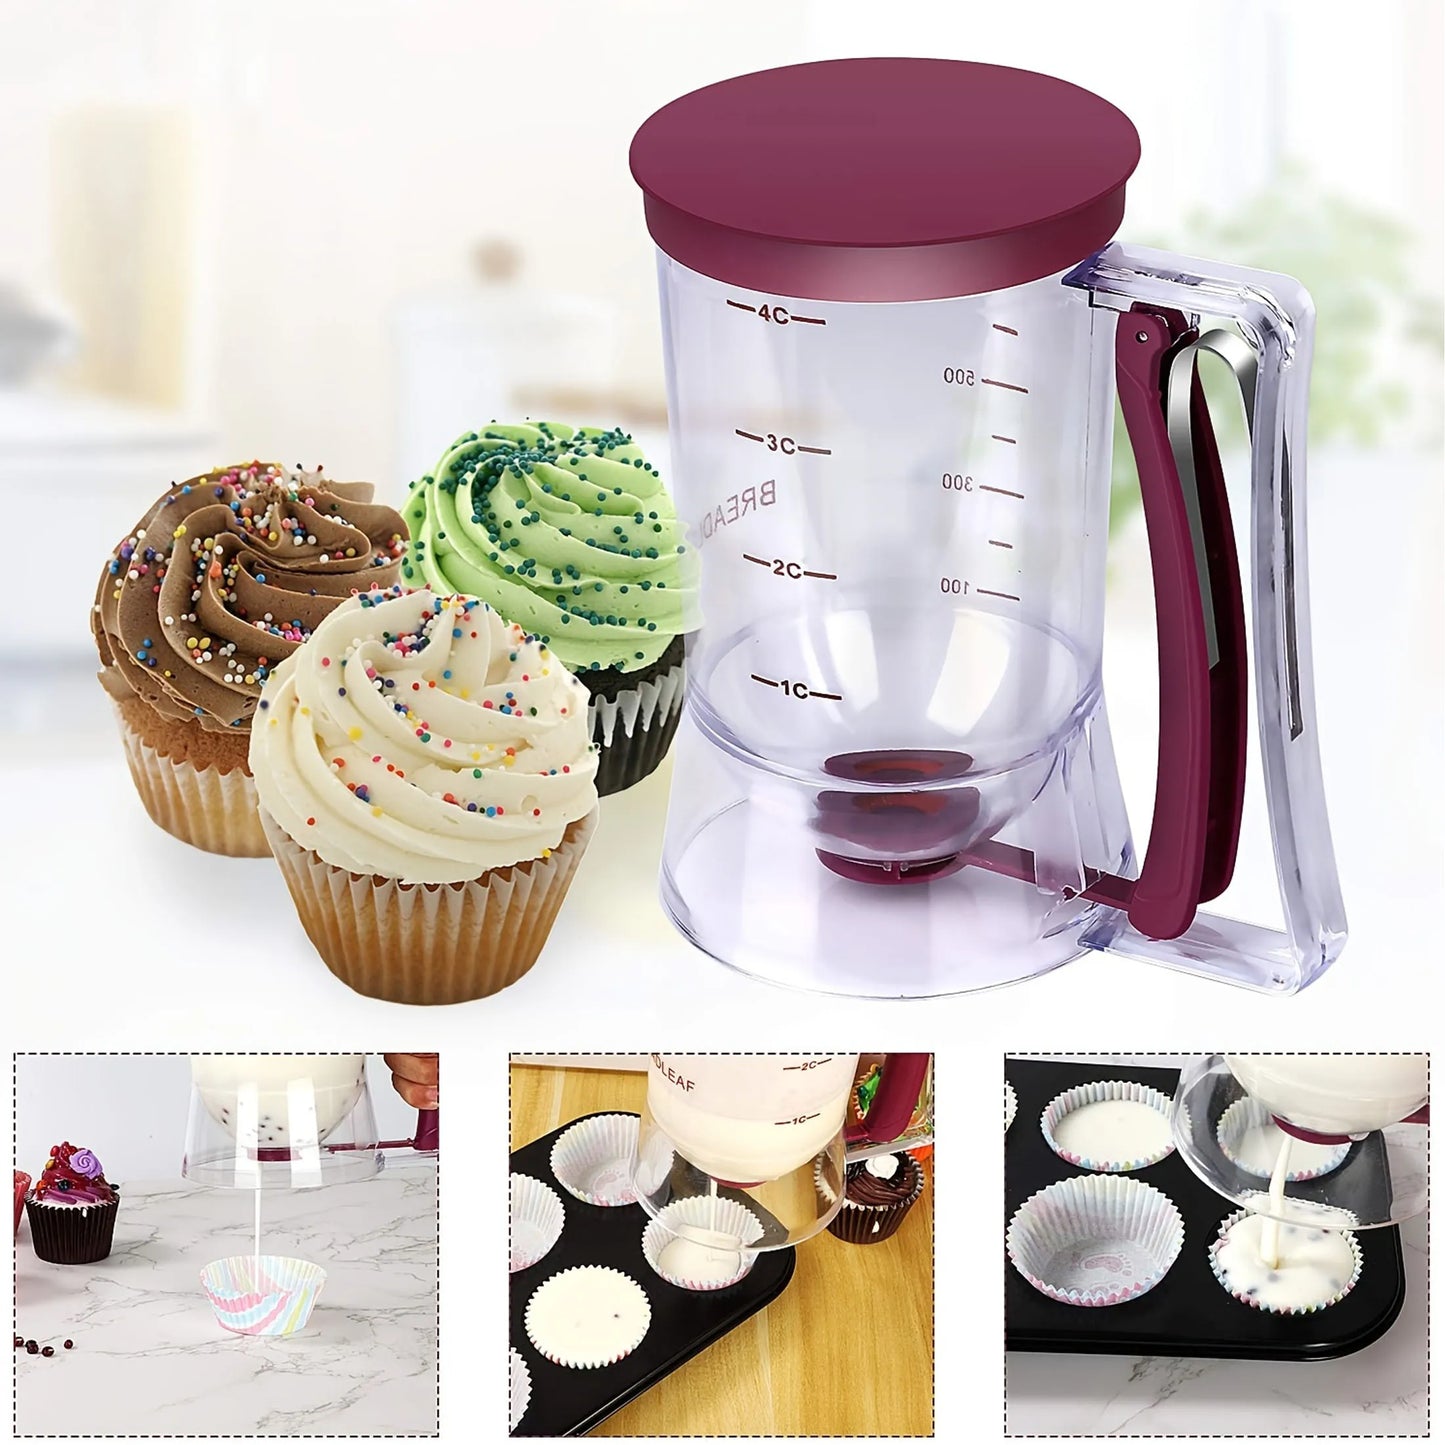 1 Pc Pancake Cupcake Batter Dispenser, Collapsible Batter For Cupcakes, Waffles, Muffin Mixes or Any Baked Goods